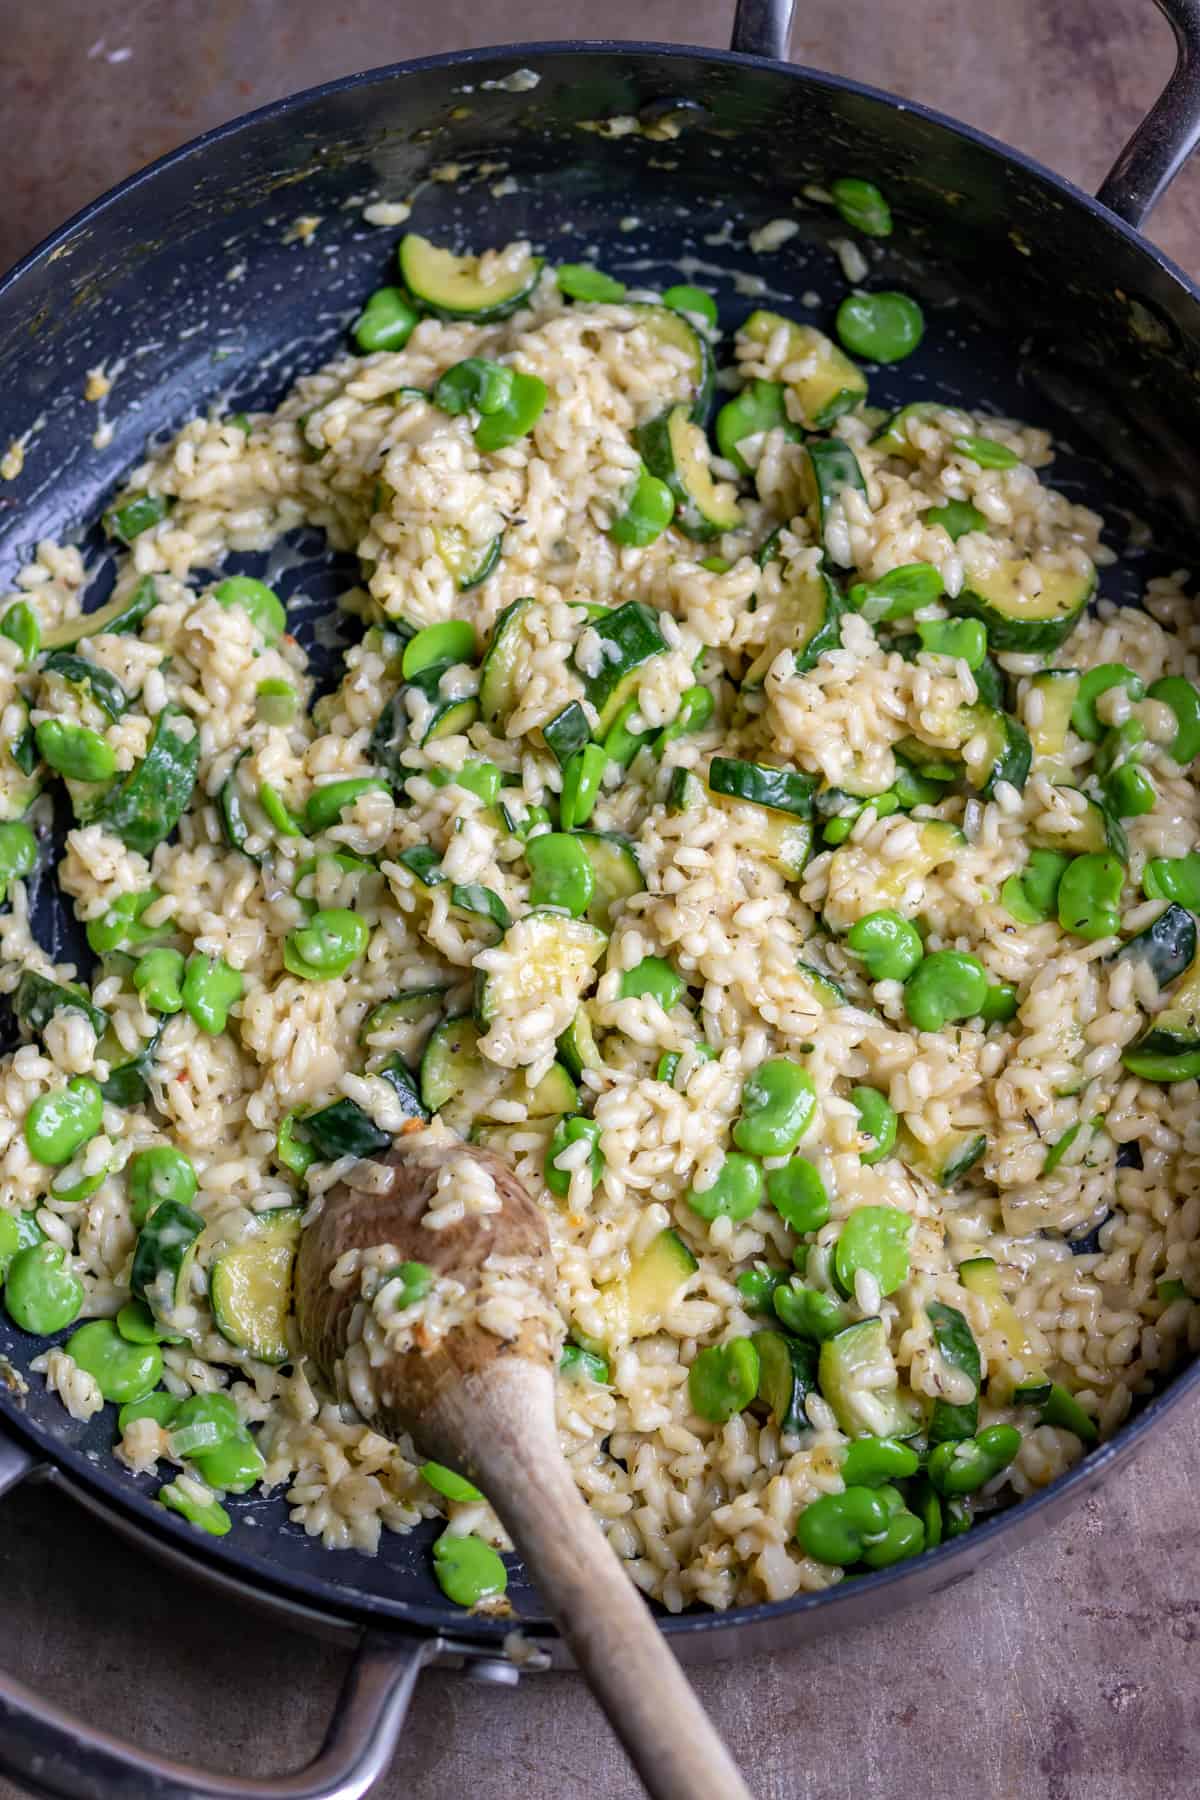 Finished risotto in a pan.